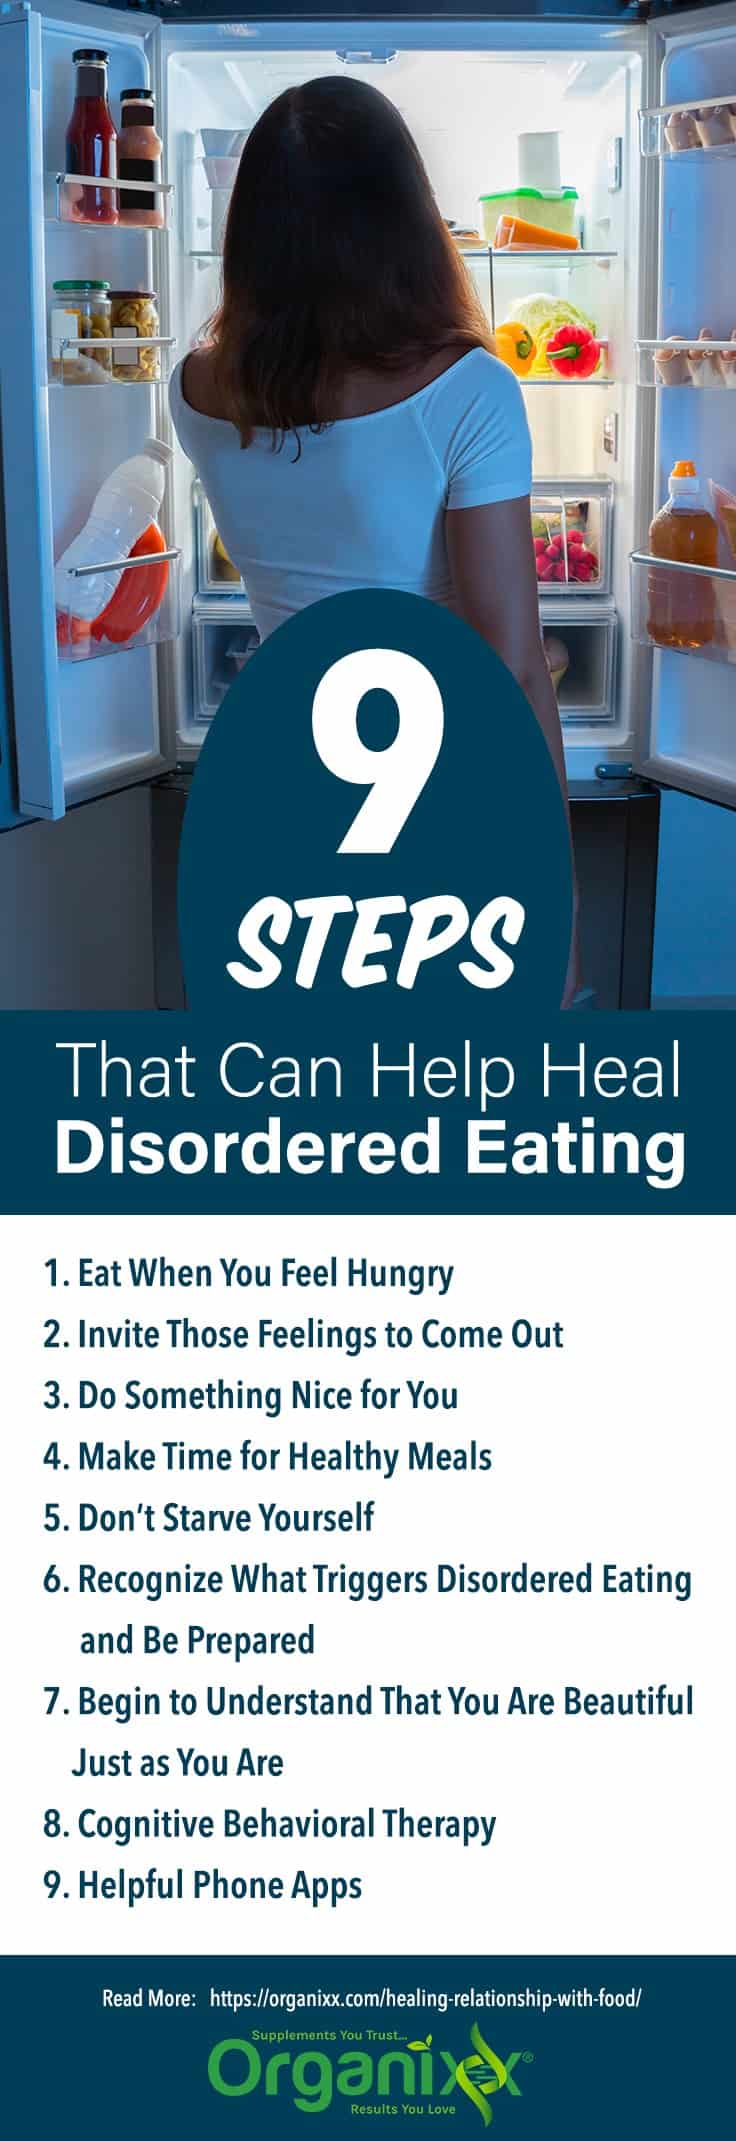 infographic list of tips for healing disordered eating